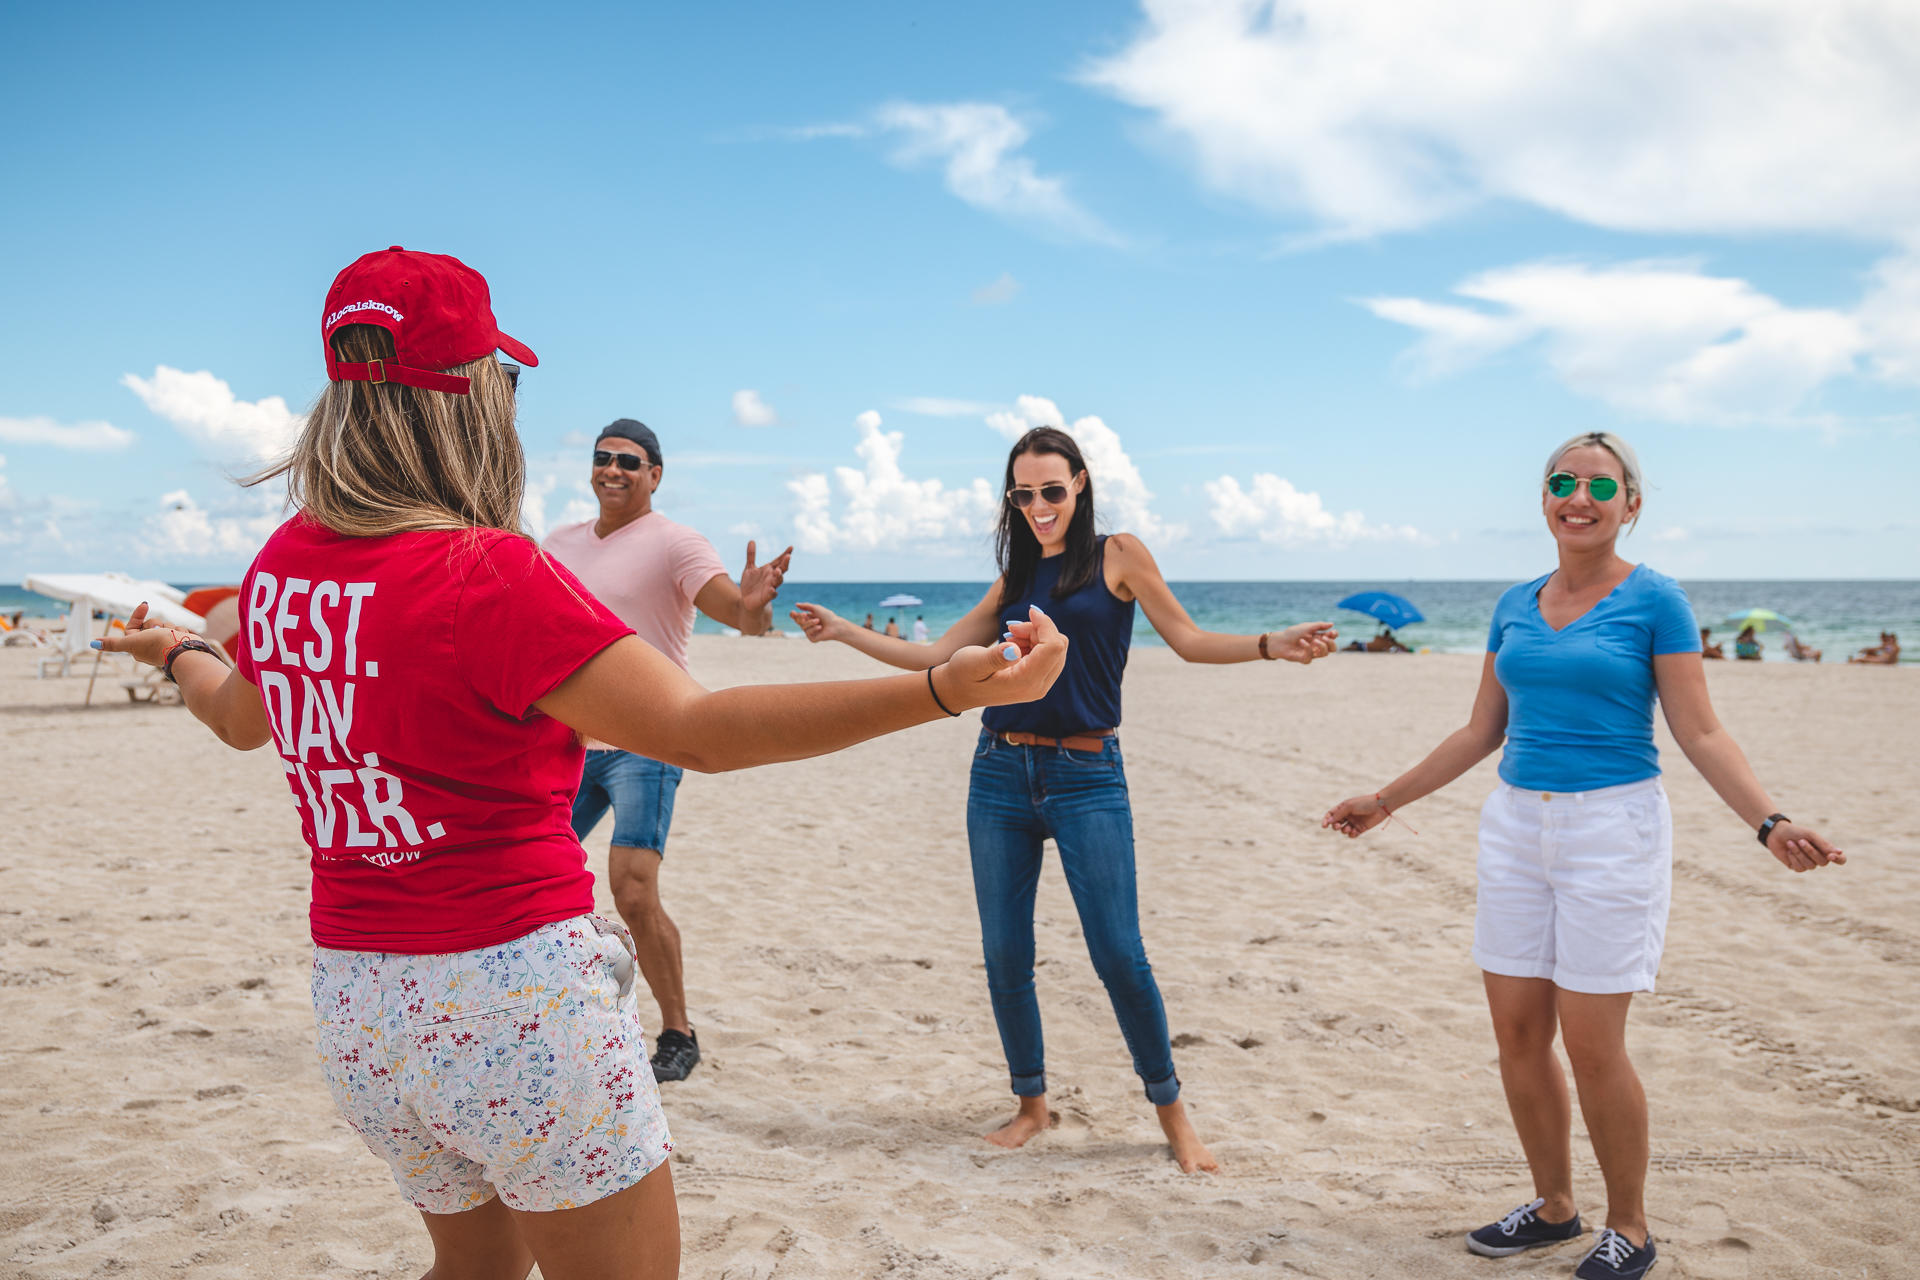 Rhythms of Miami: Private Dancing & Nightlife Tour